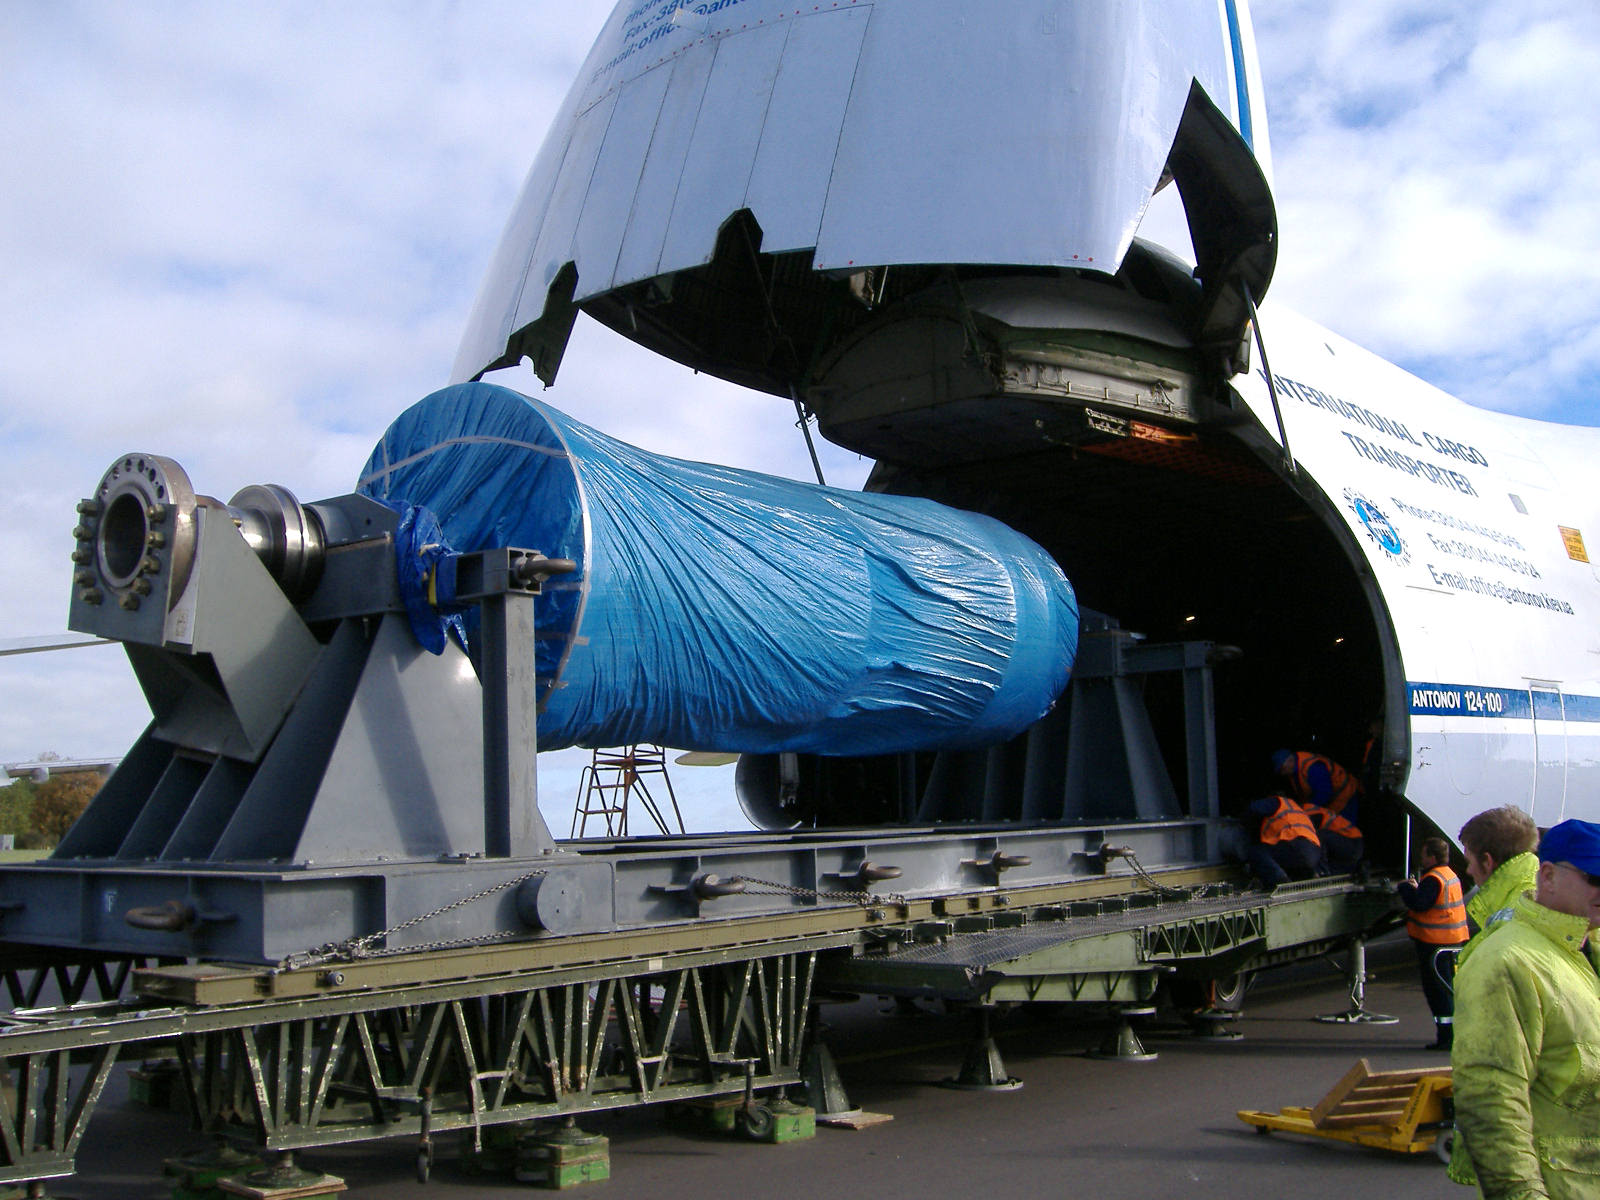 Loading of a 53t Rotor on skid into an Antonov